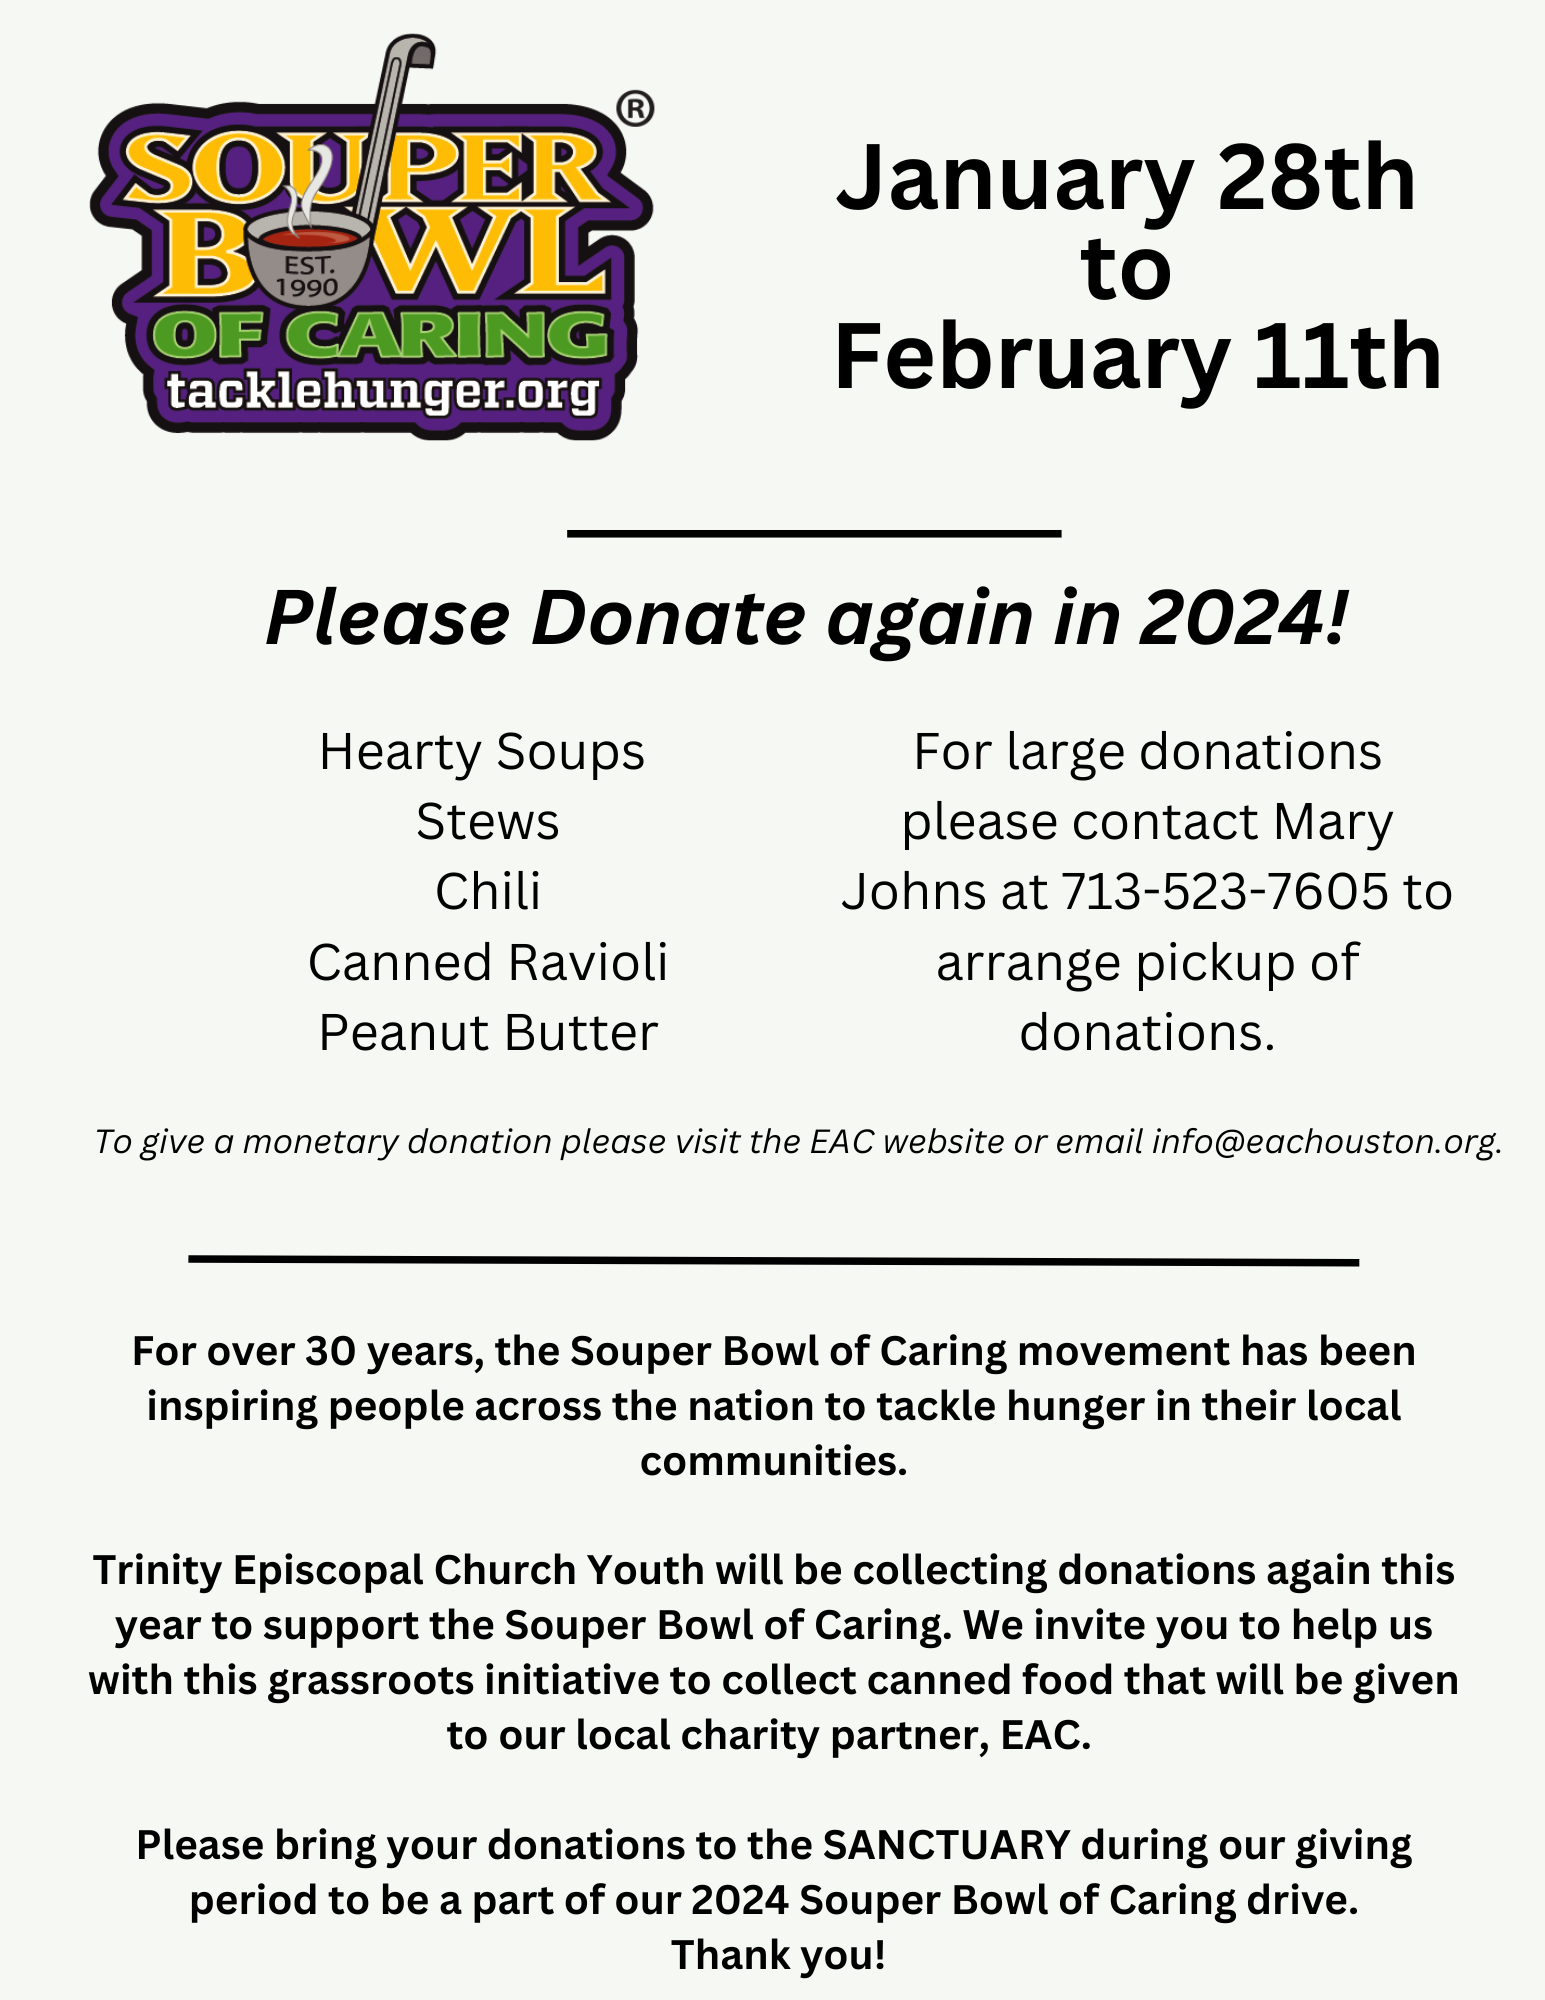 souperbowl-of-caring-2024_35